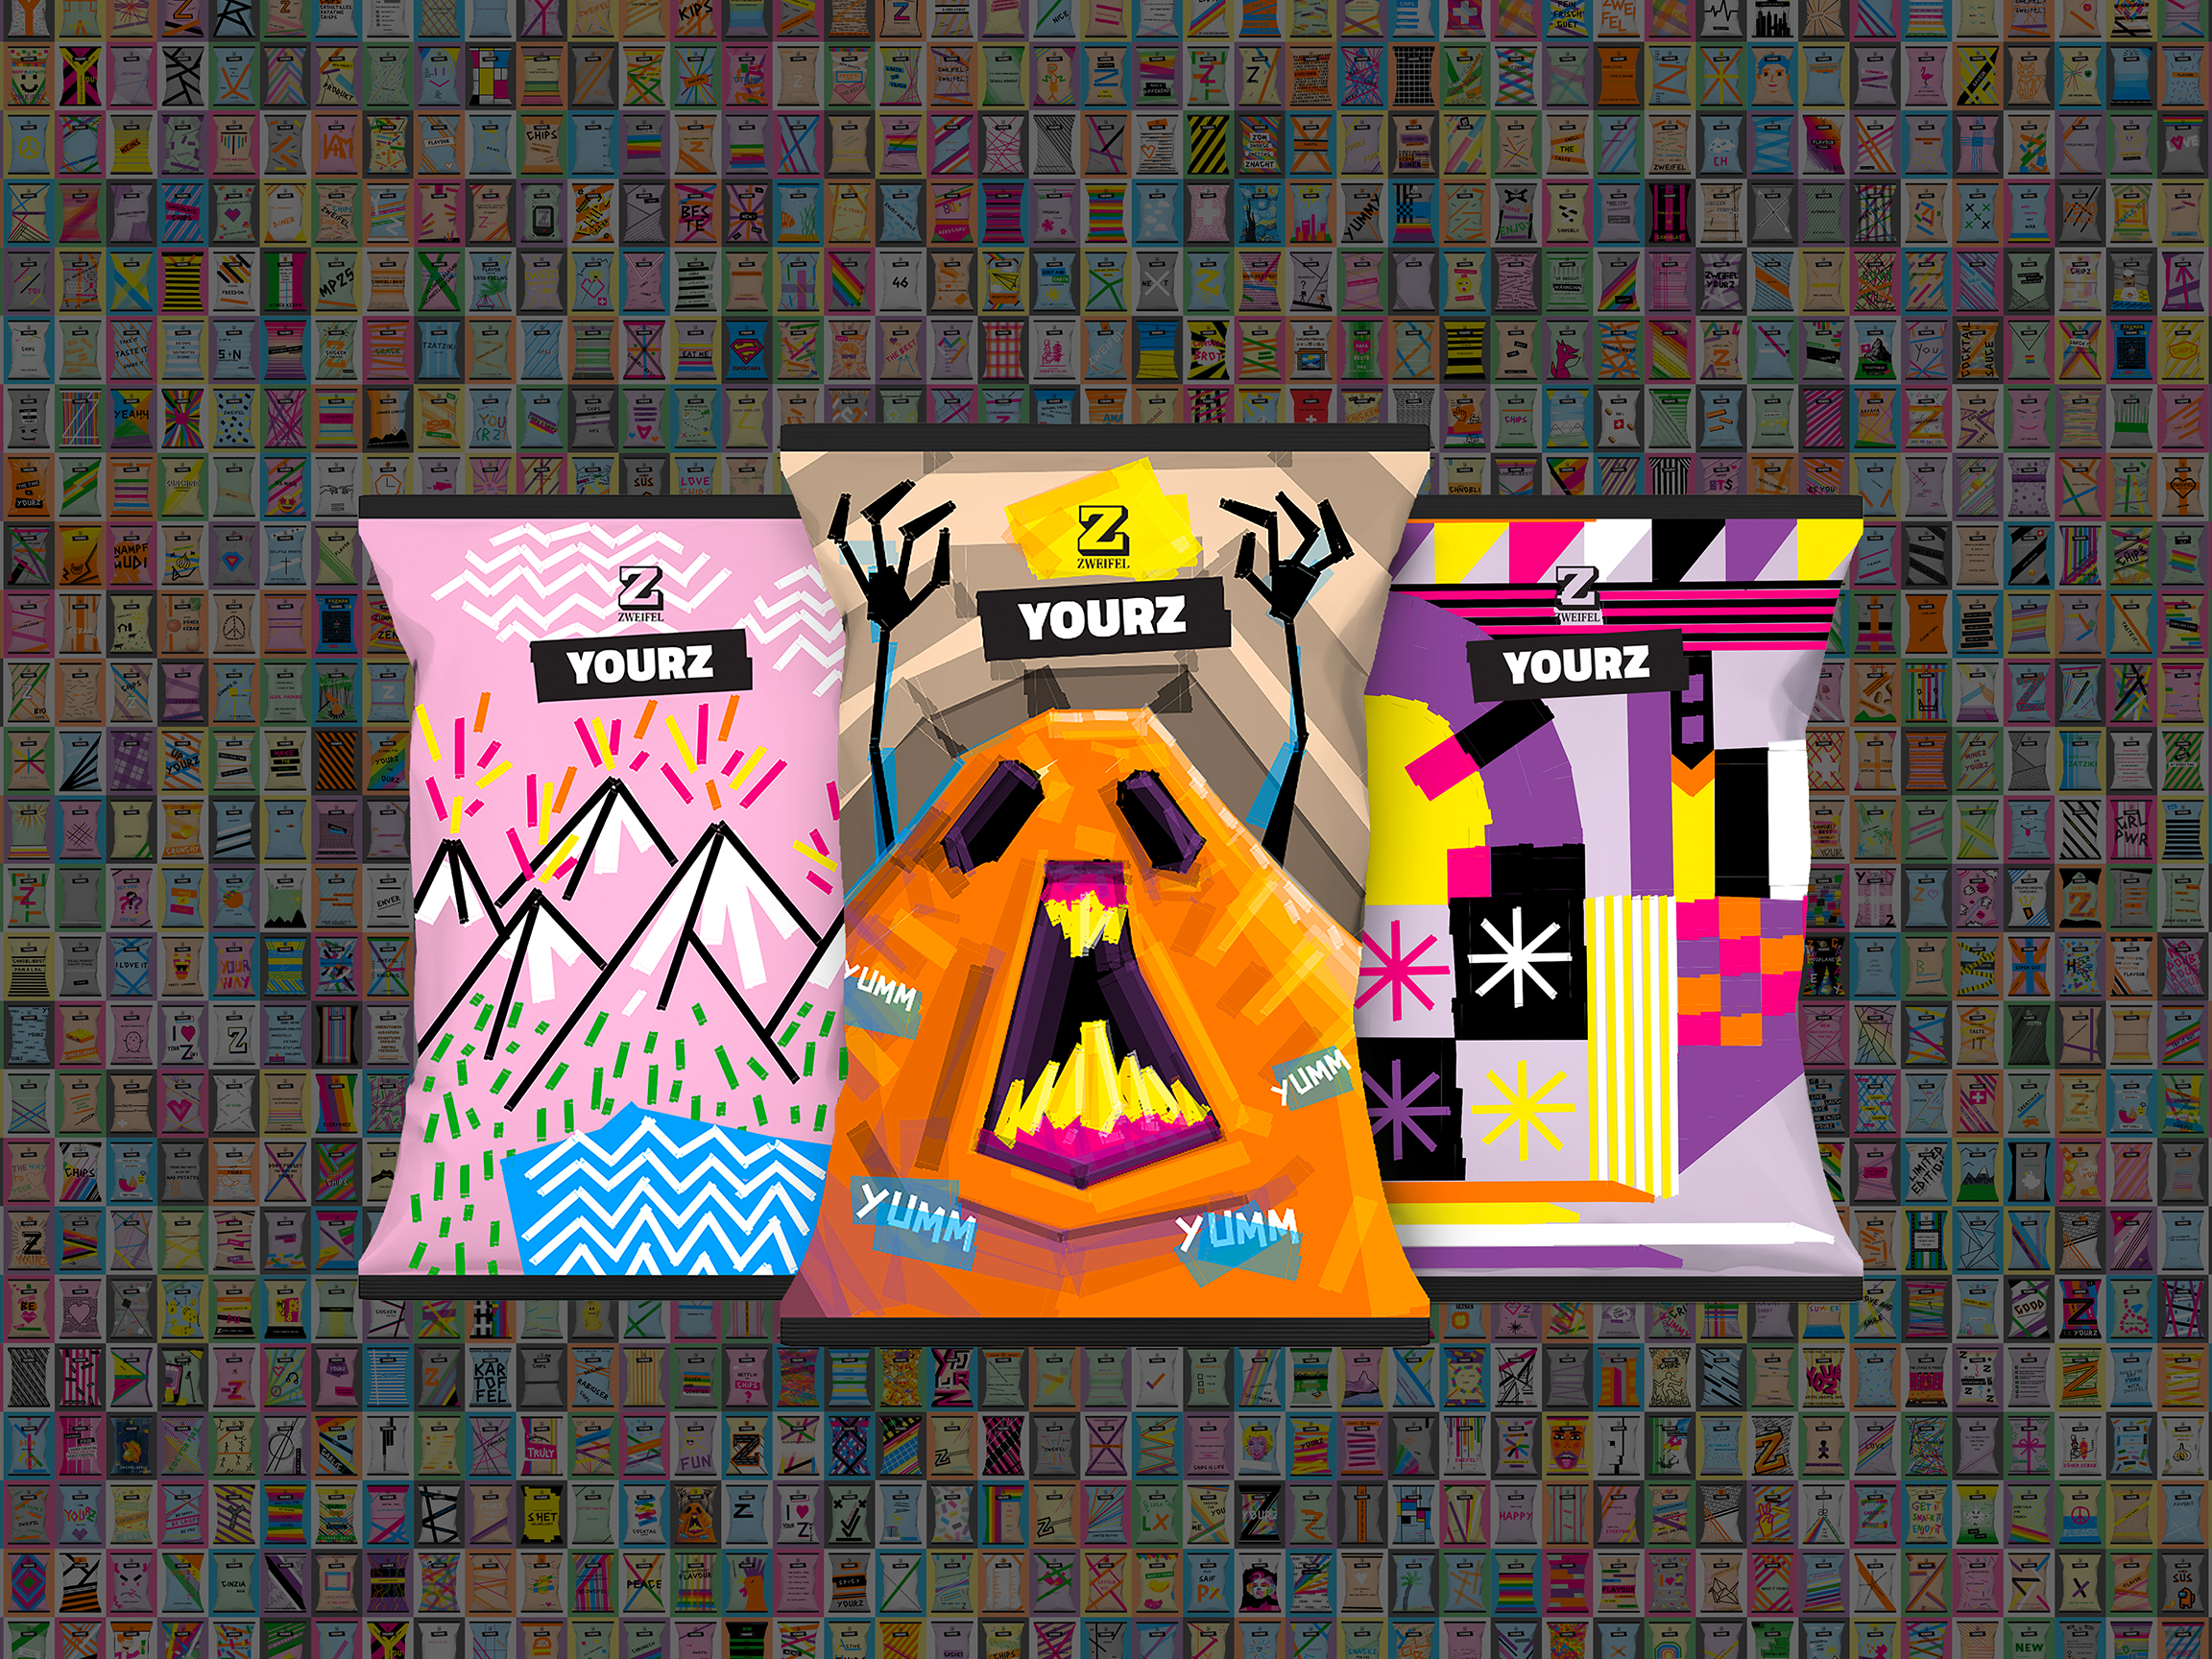 Image of three colorful and modern designed chips packages of the Zweifel brand from the campaign by Jung von Matt LIMMAT Zurich for Zweifel.